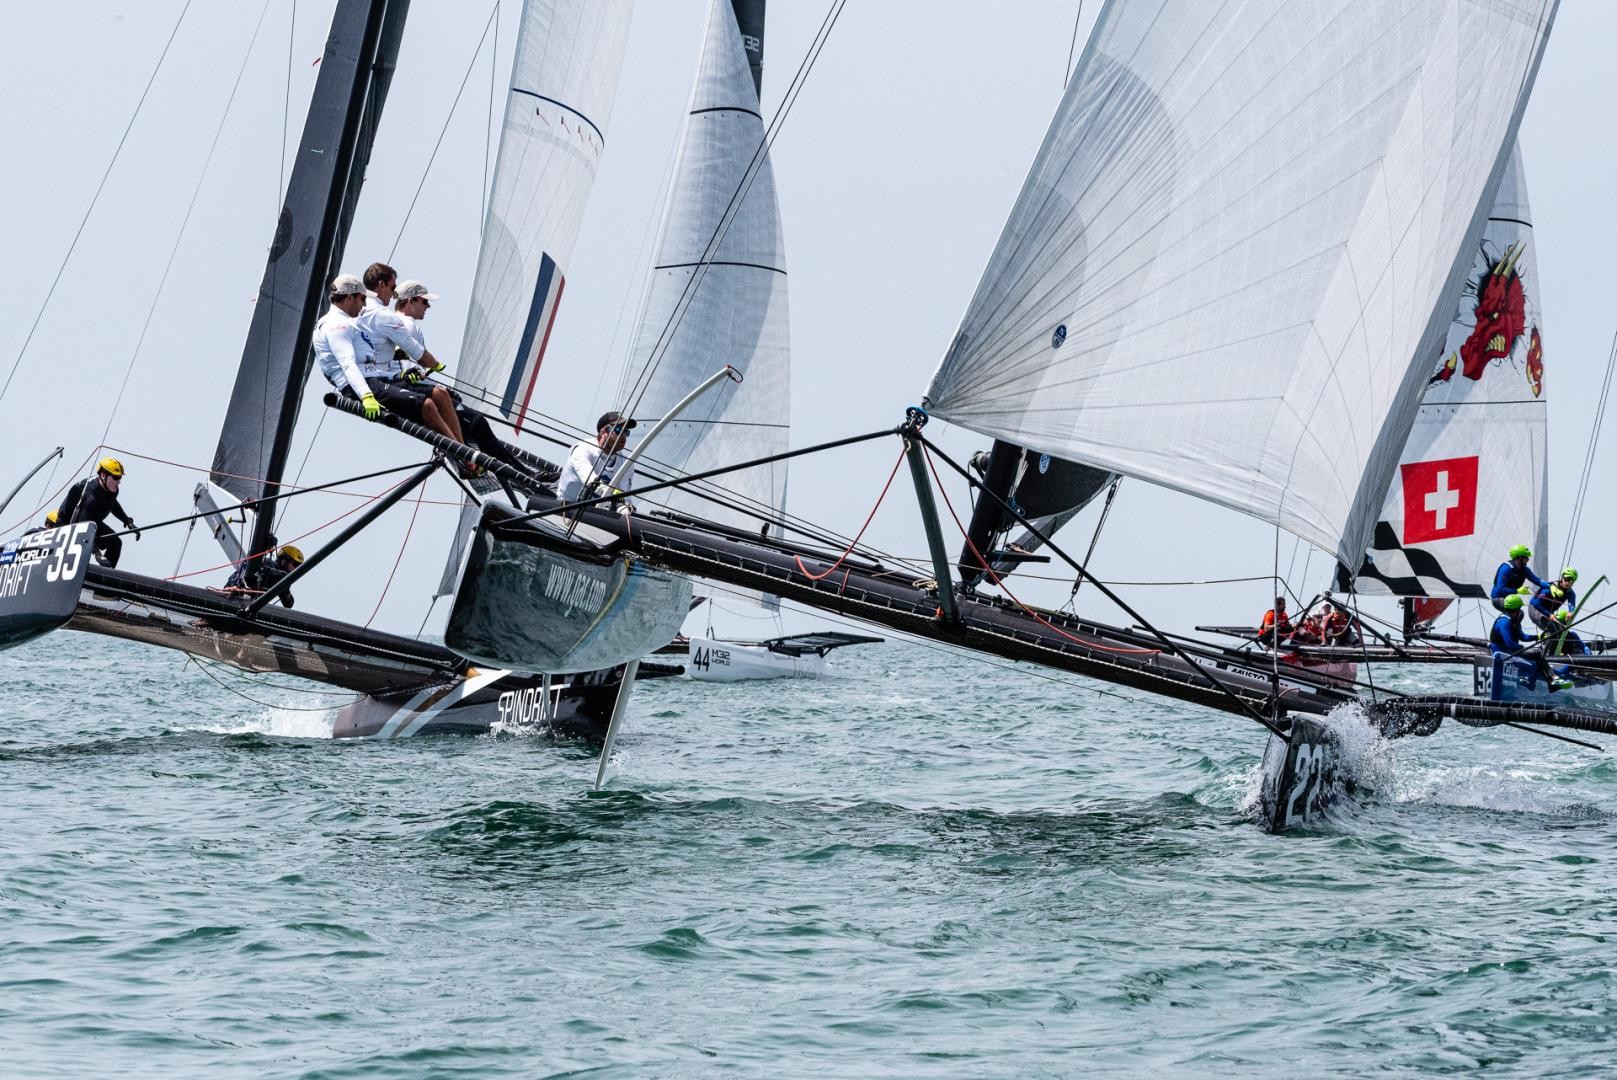 Will GAC Pindar be able to keep her nose in front this week in Medemblik?